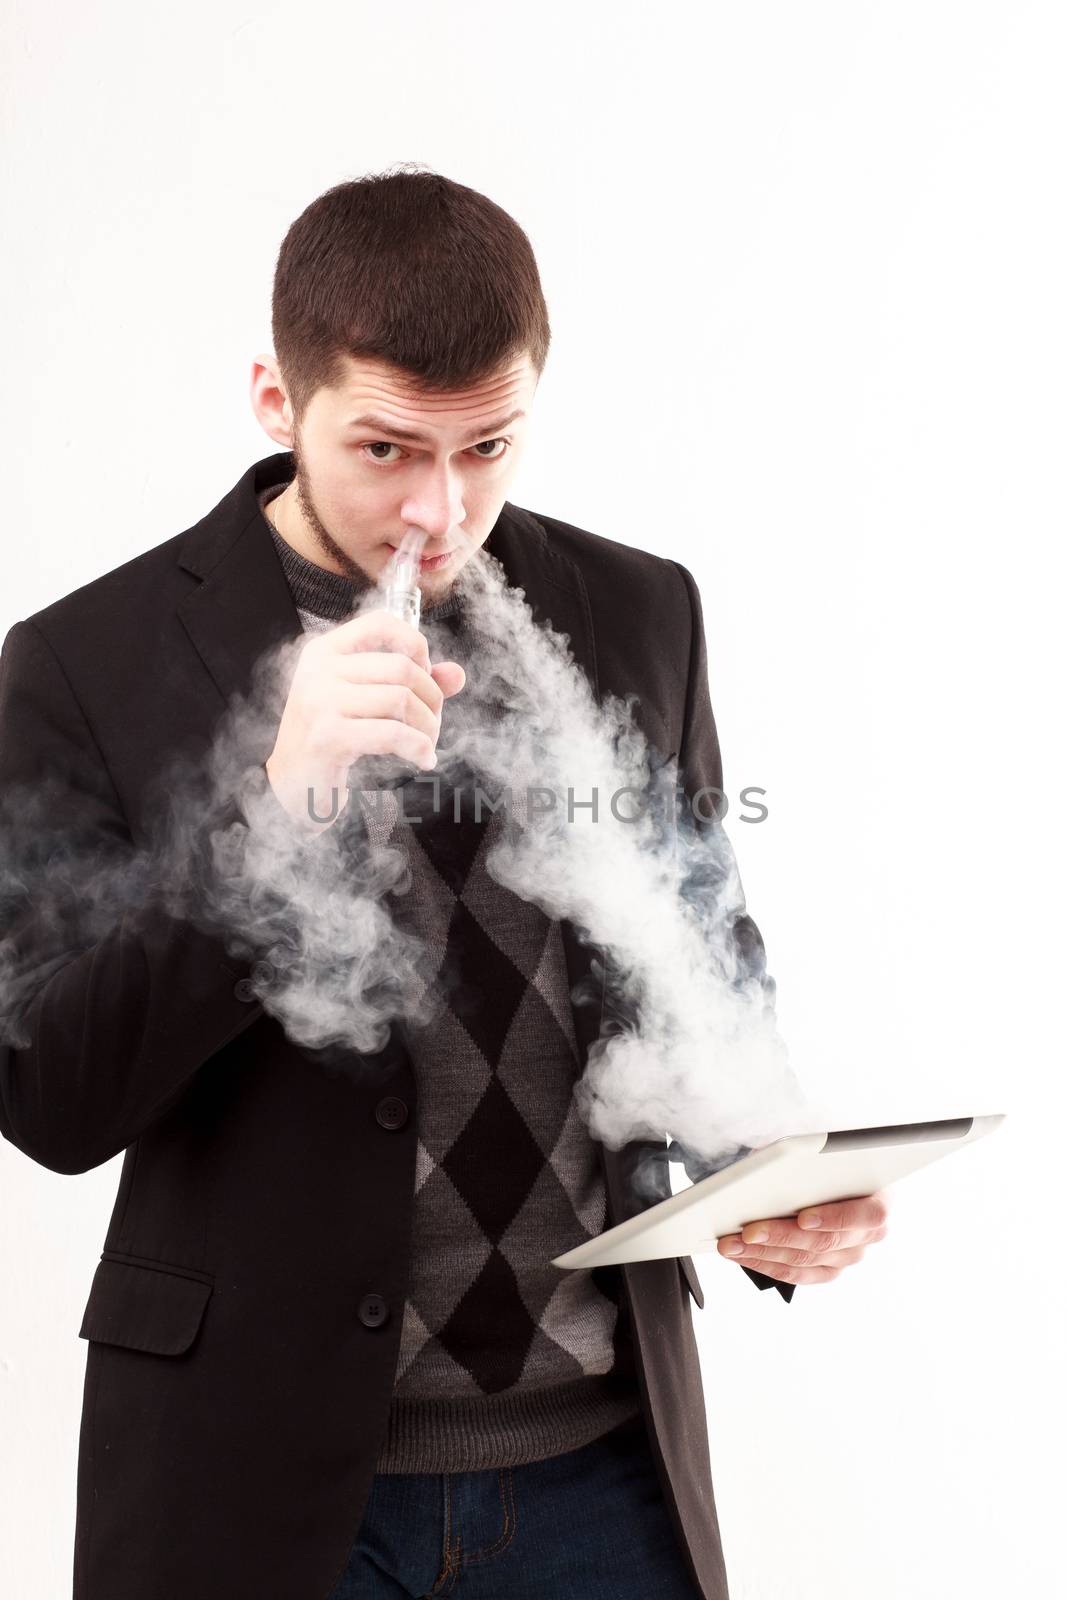 Vaping casual businessman using his tablet isolated on white looking in camera